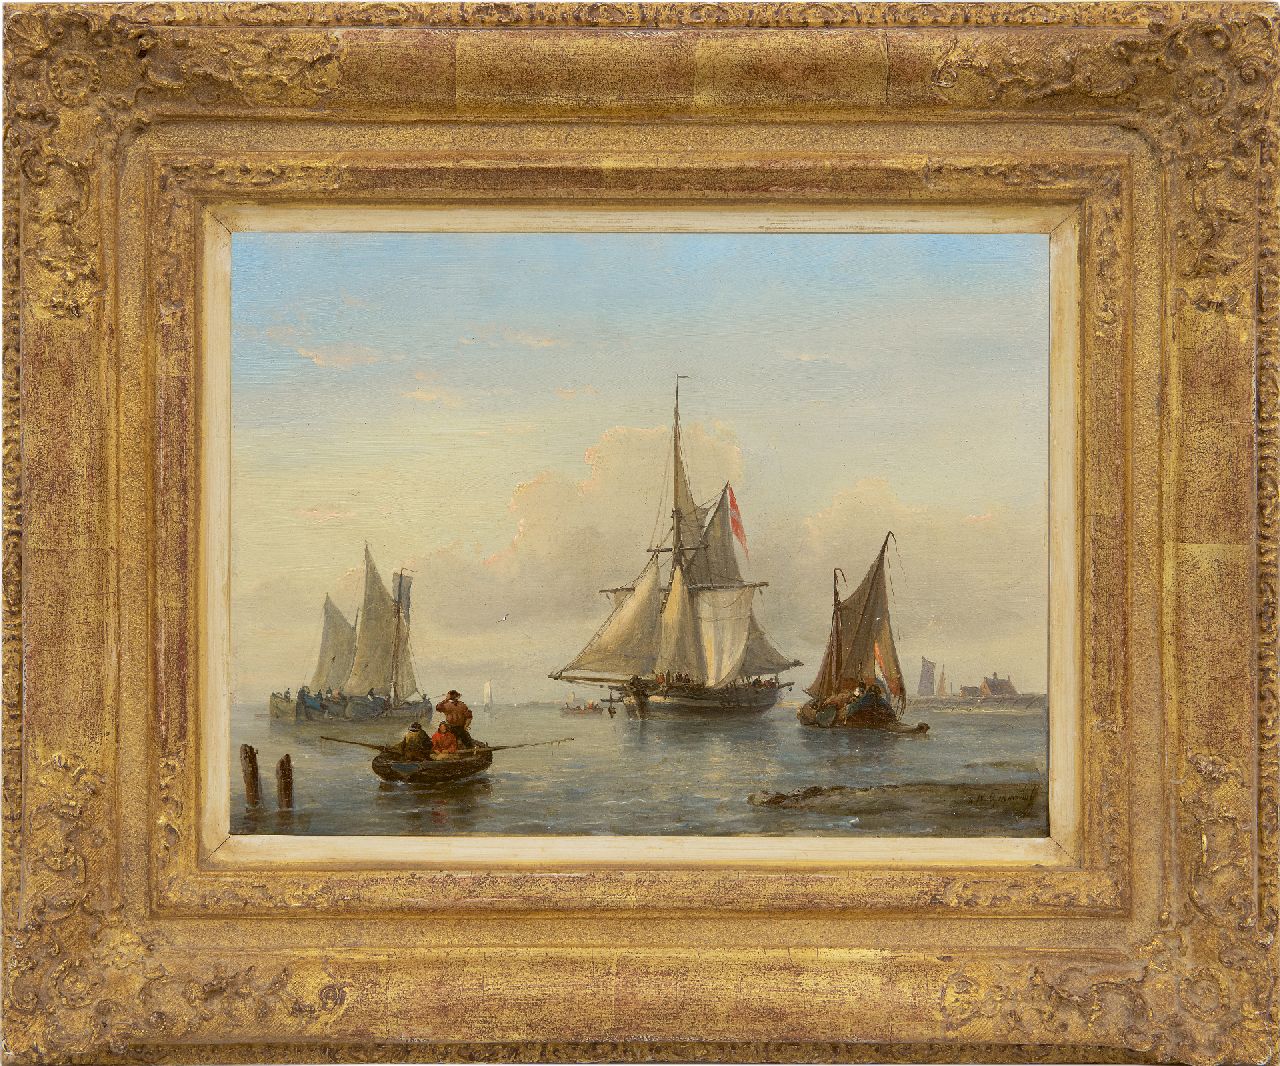 Opdenhoff G.W.  | Witzel 'George Willem' Opdenhoff, Sailing ships in a calm near the coast, oil on panel 20.8 x 28.4 cm, signed l.r.